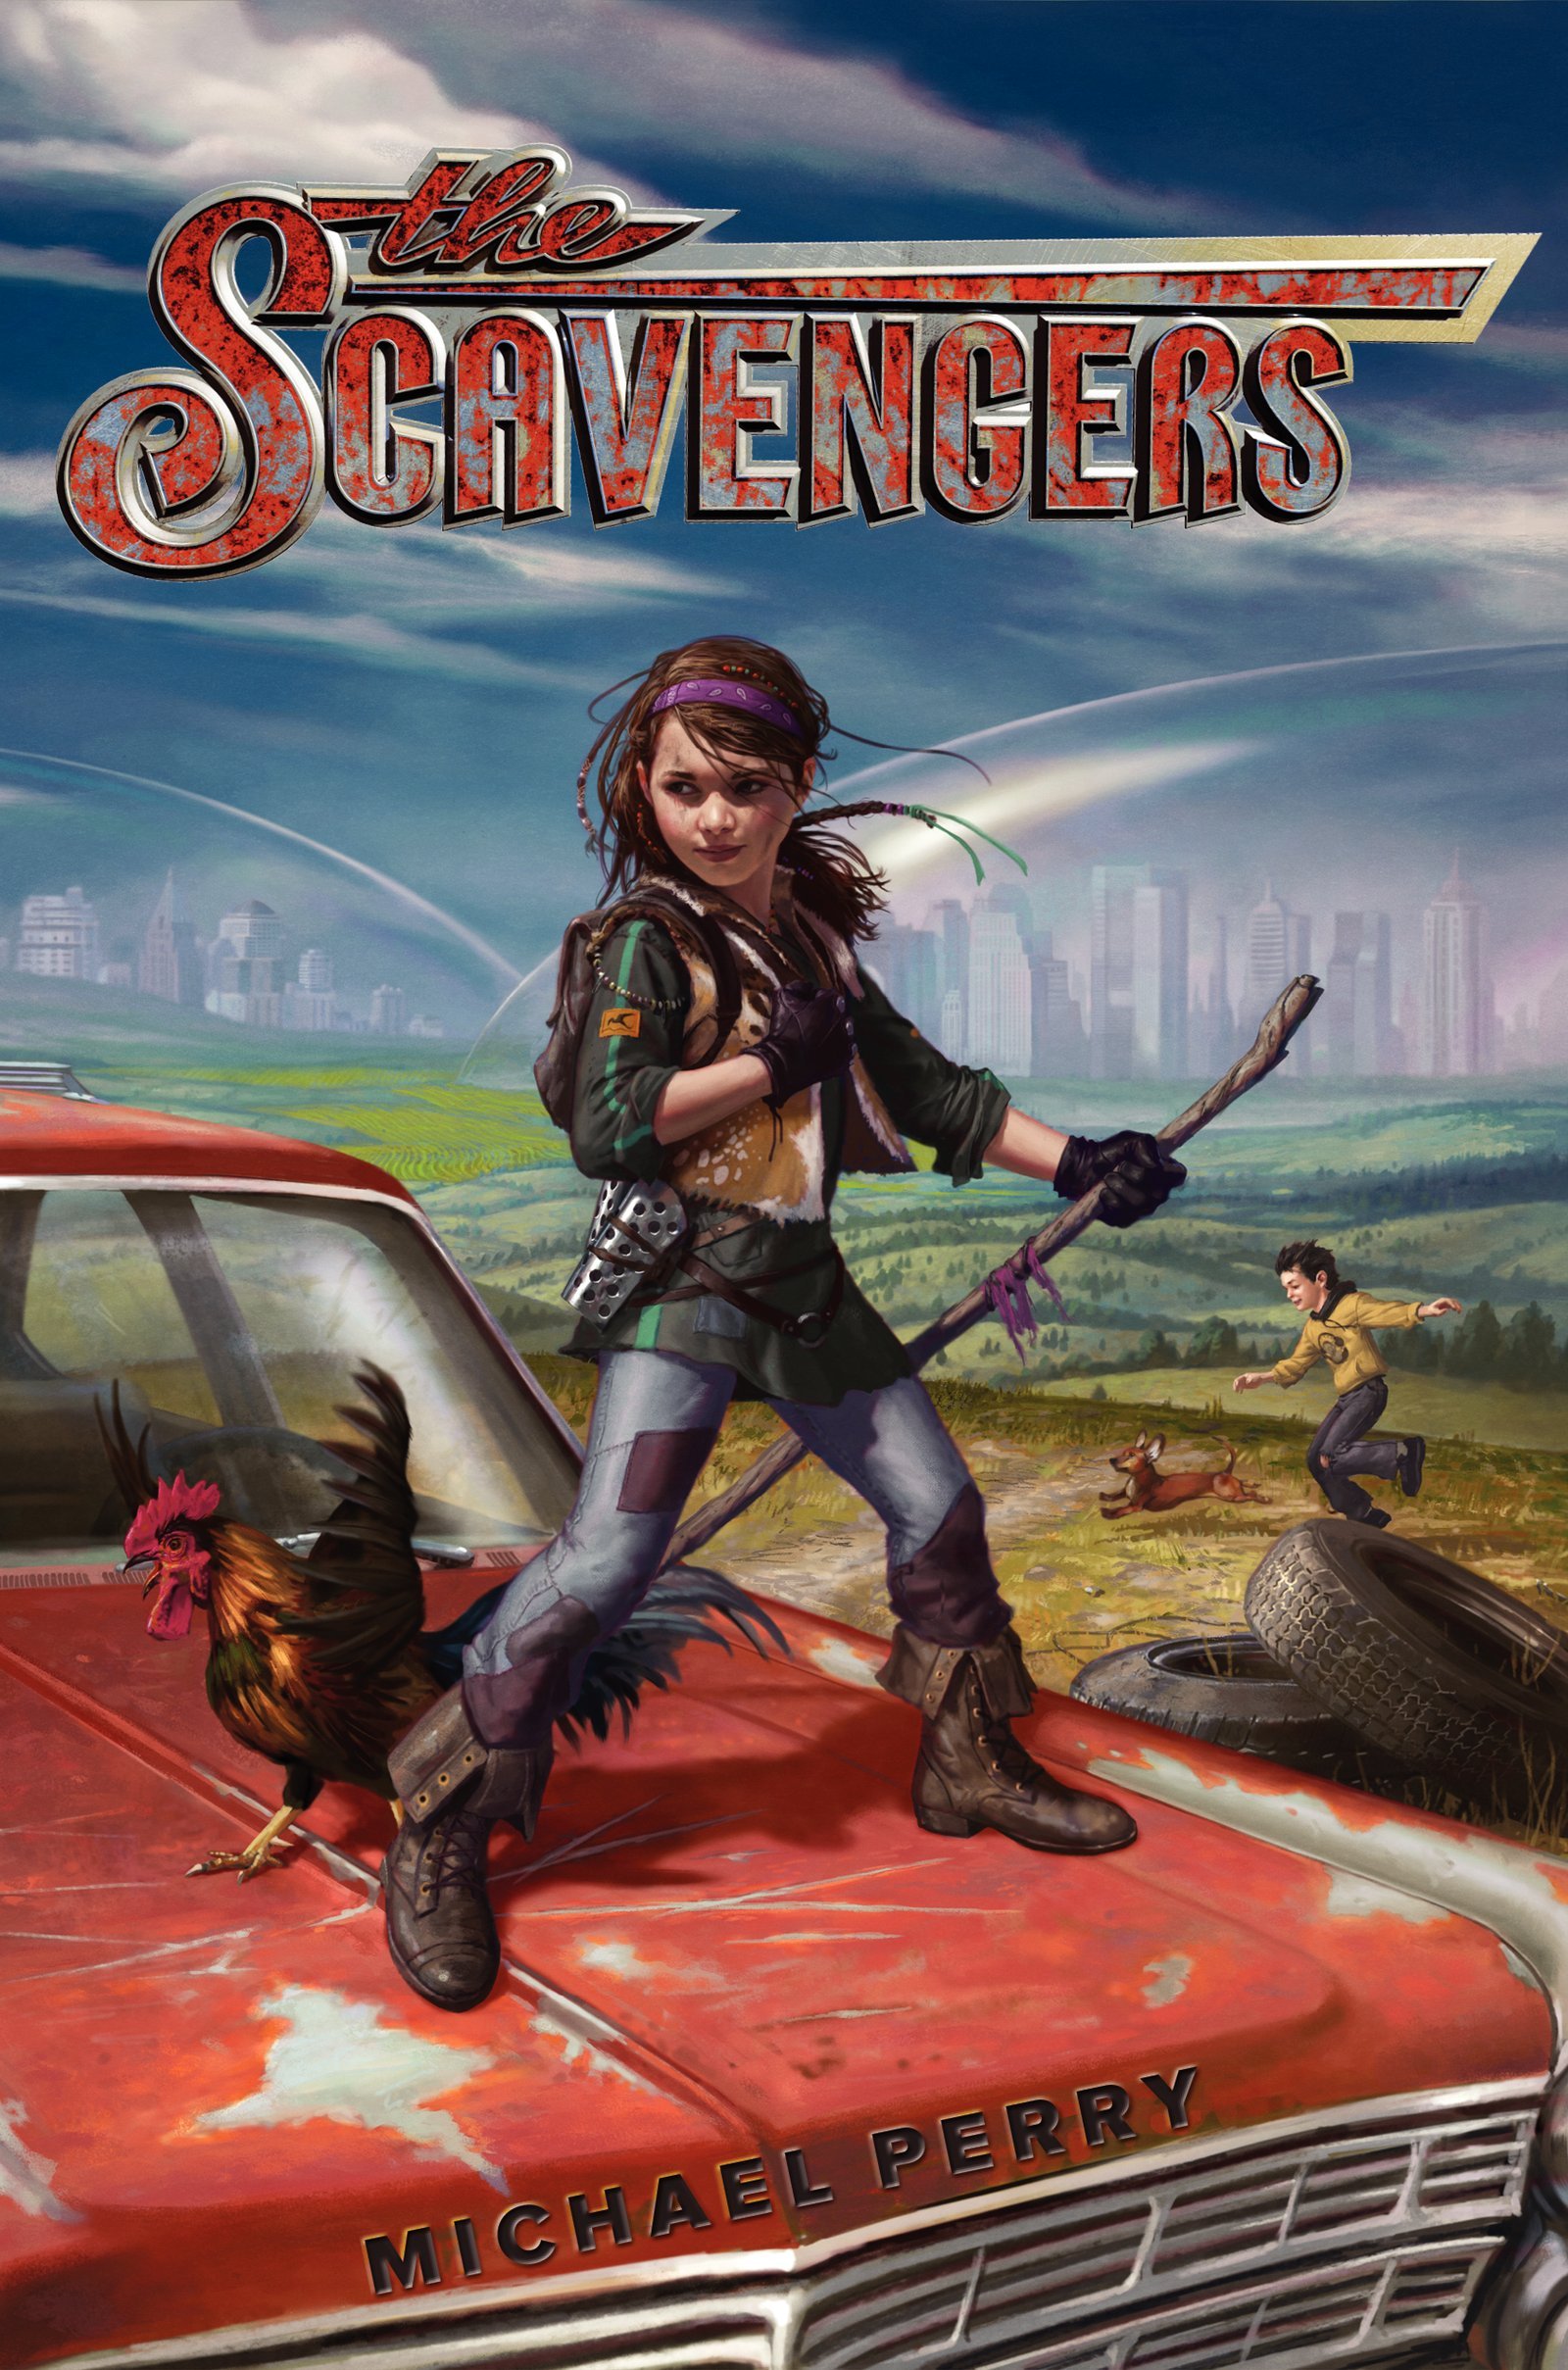 Scavengers Librarian Preview: Harper Collins (Fall 2014)